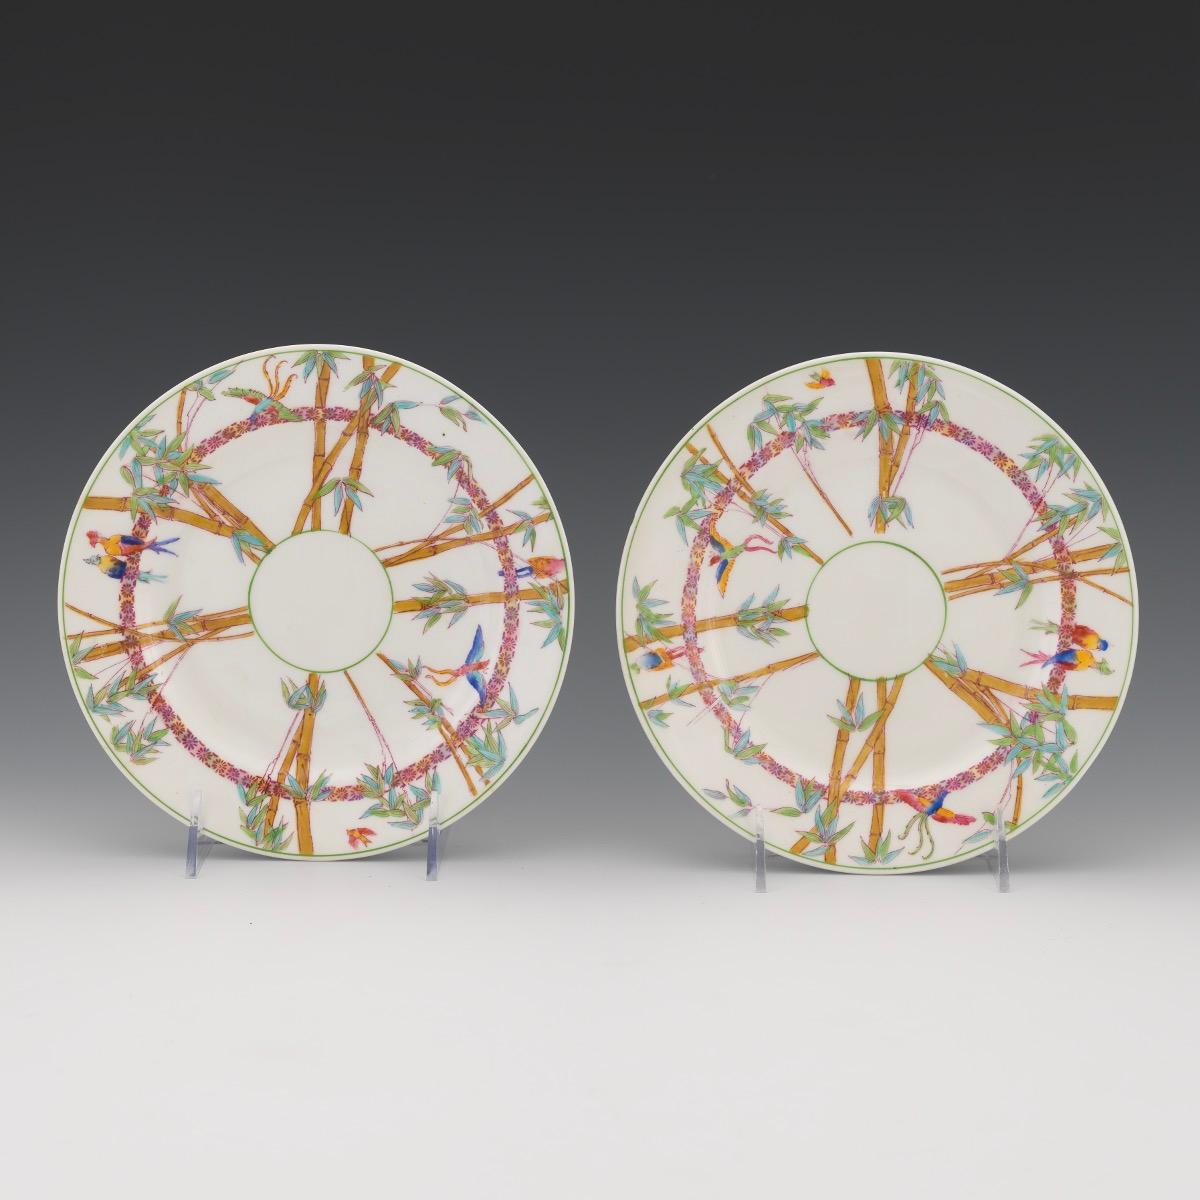 Aesthetic Movement Tropical Birds Amongst Bamboo Set of 12 Plates, George Jones & Sons for Tiffany